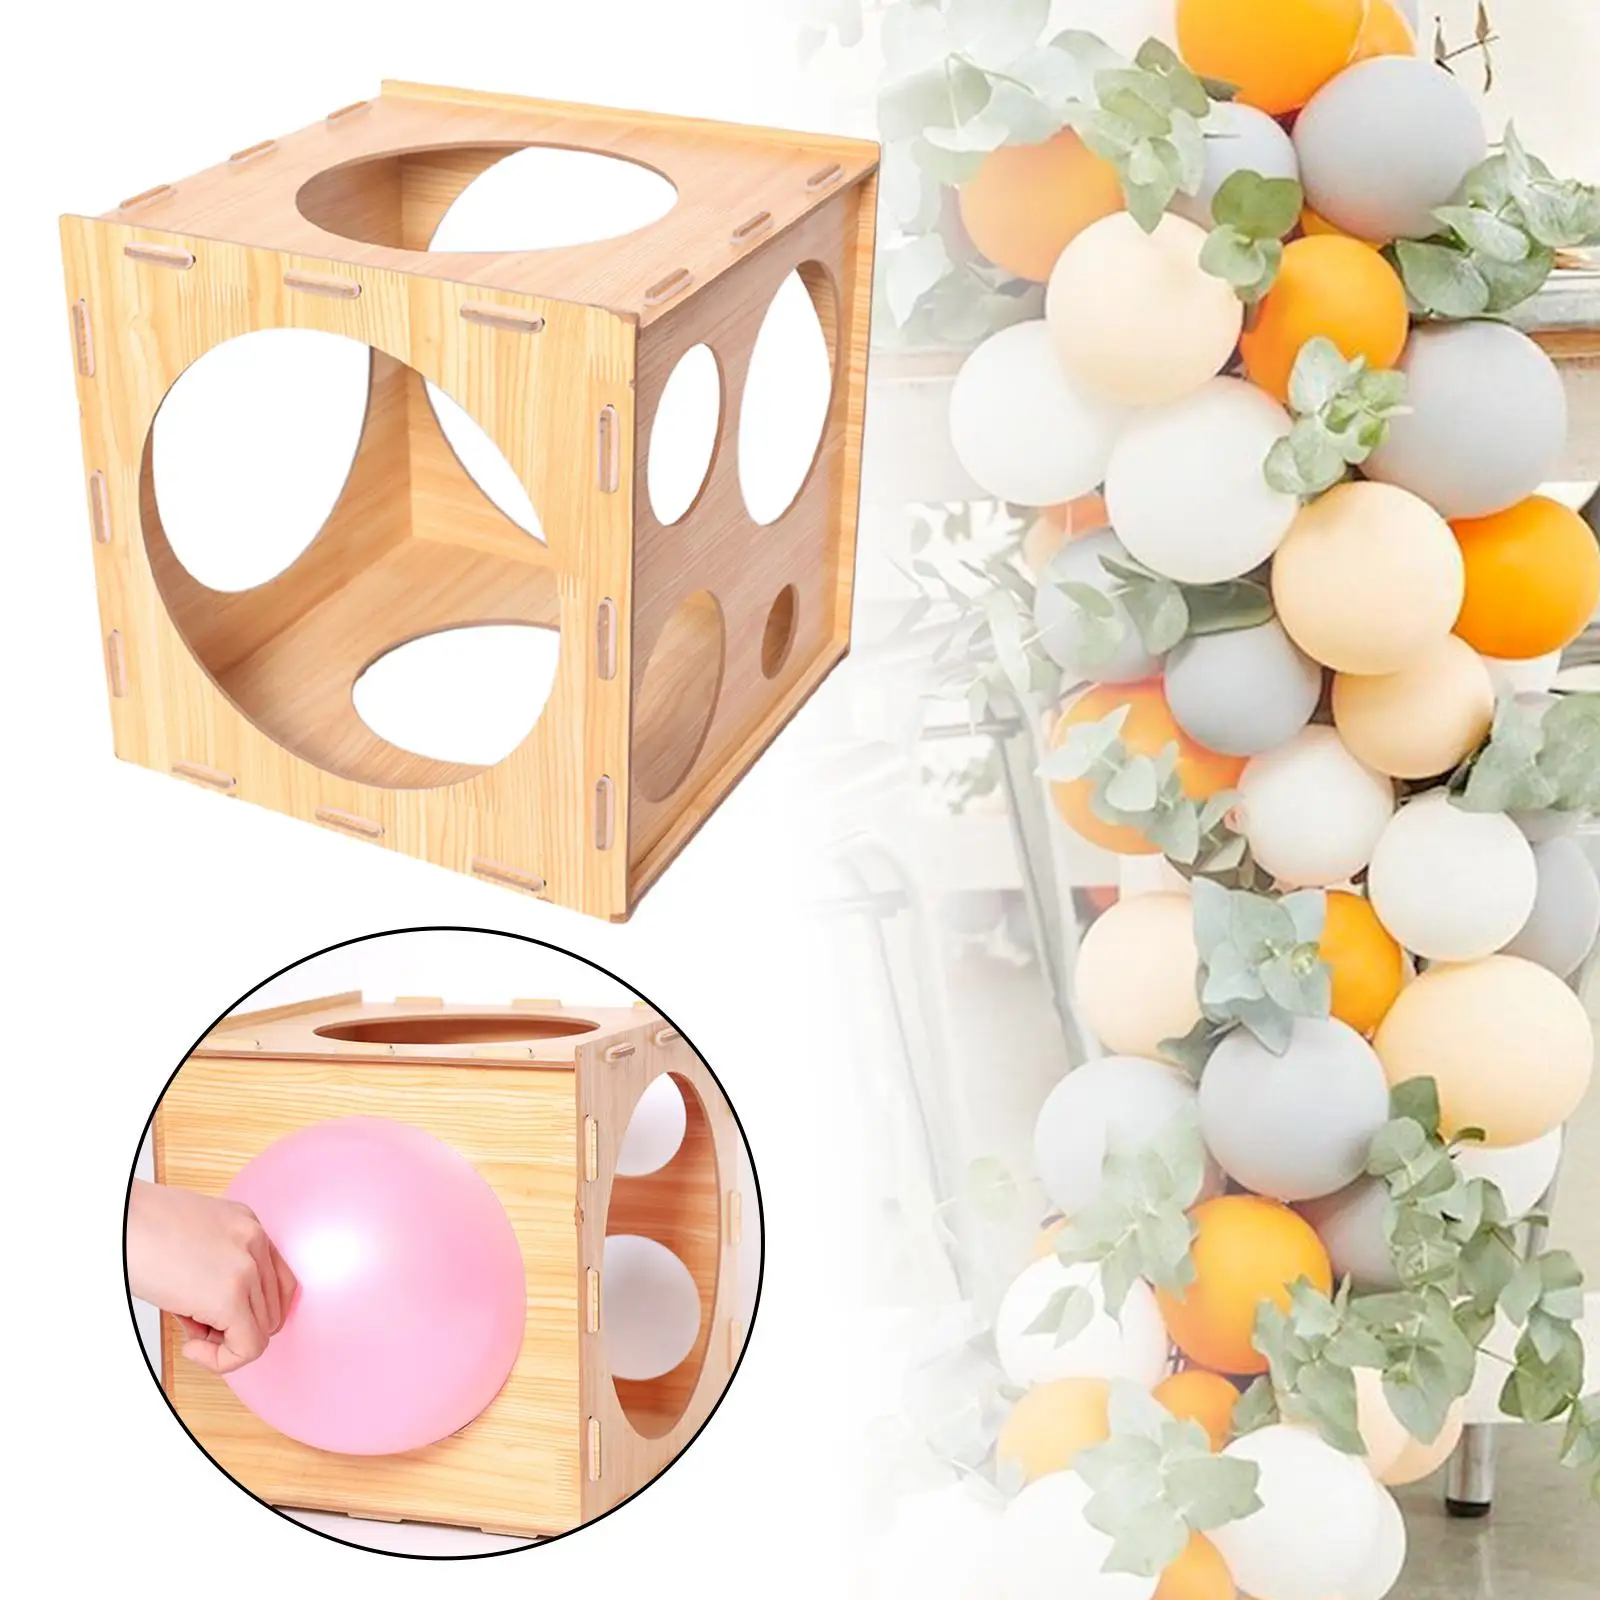 2-10 inch Balloon Sizer Box Cubic Wooden 9 Holes Balloon Size Measurement Box for Balloon Decorations Wedding Birthday Party